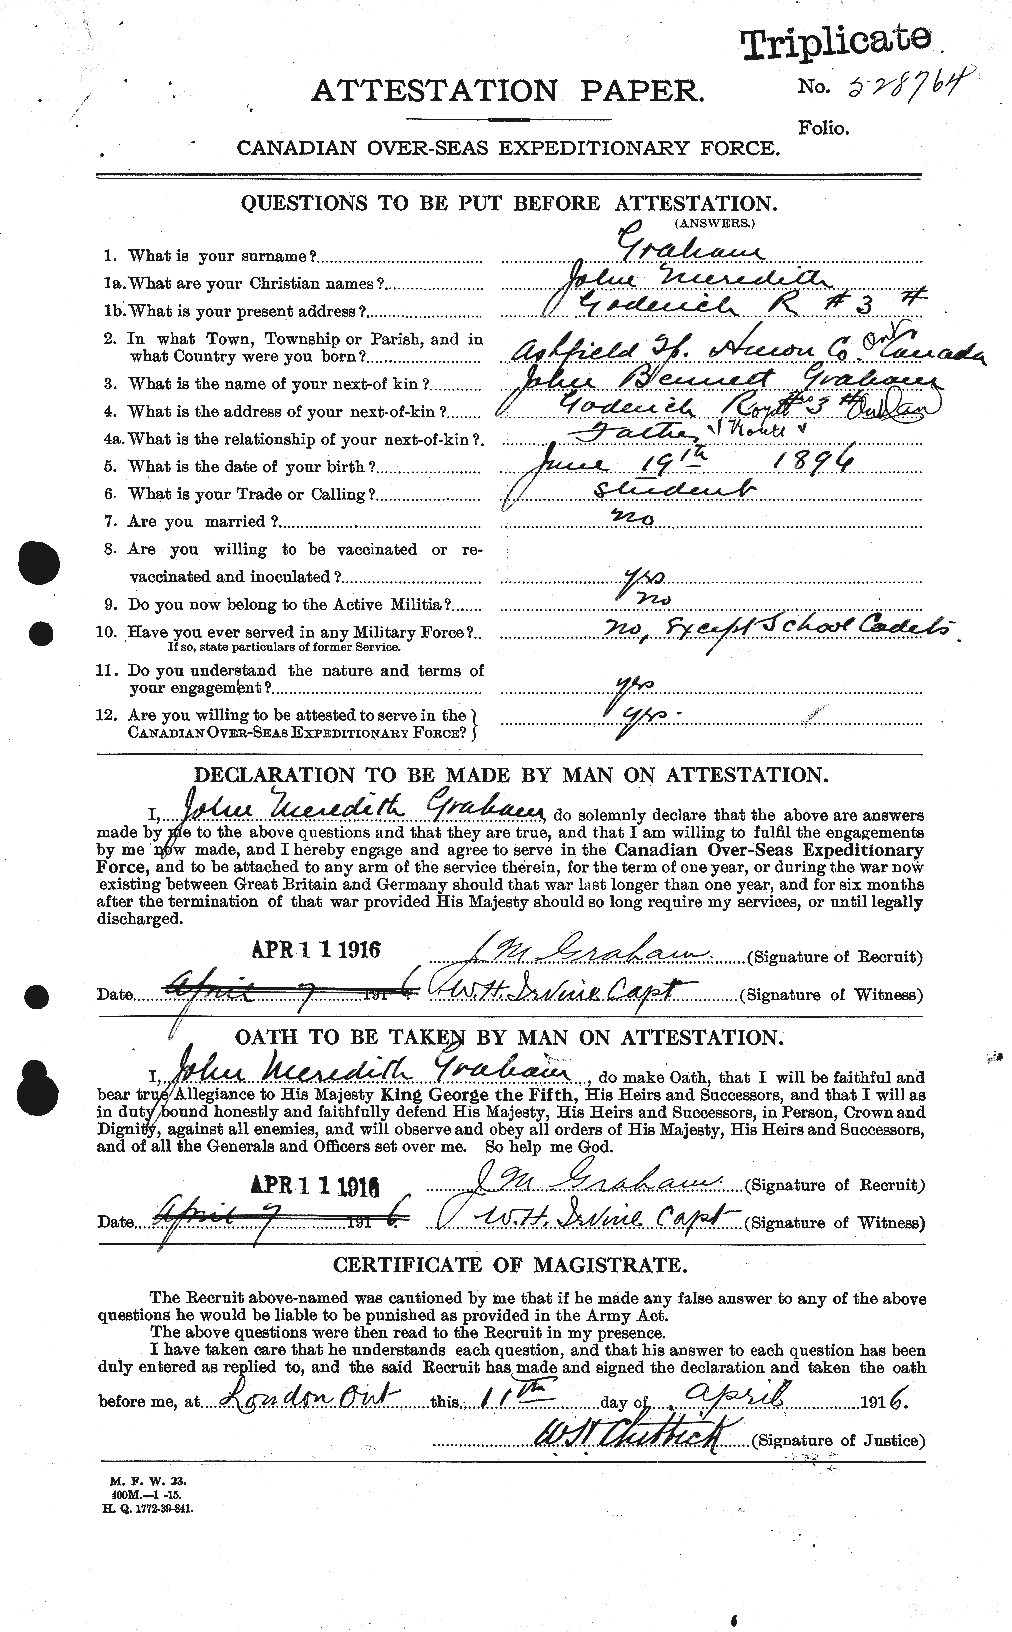 Personnel Records of the First World War - CEF 359199a